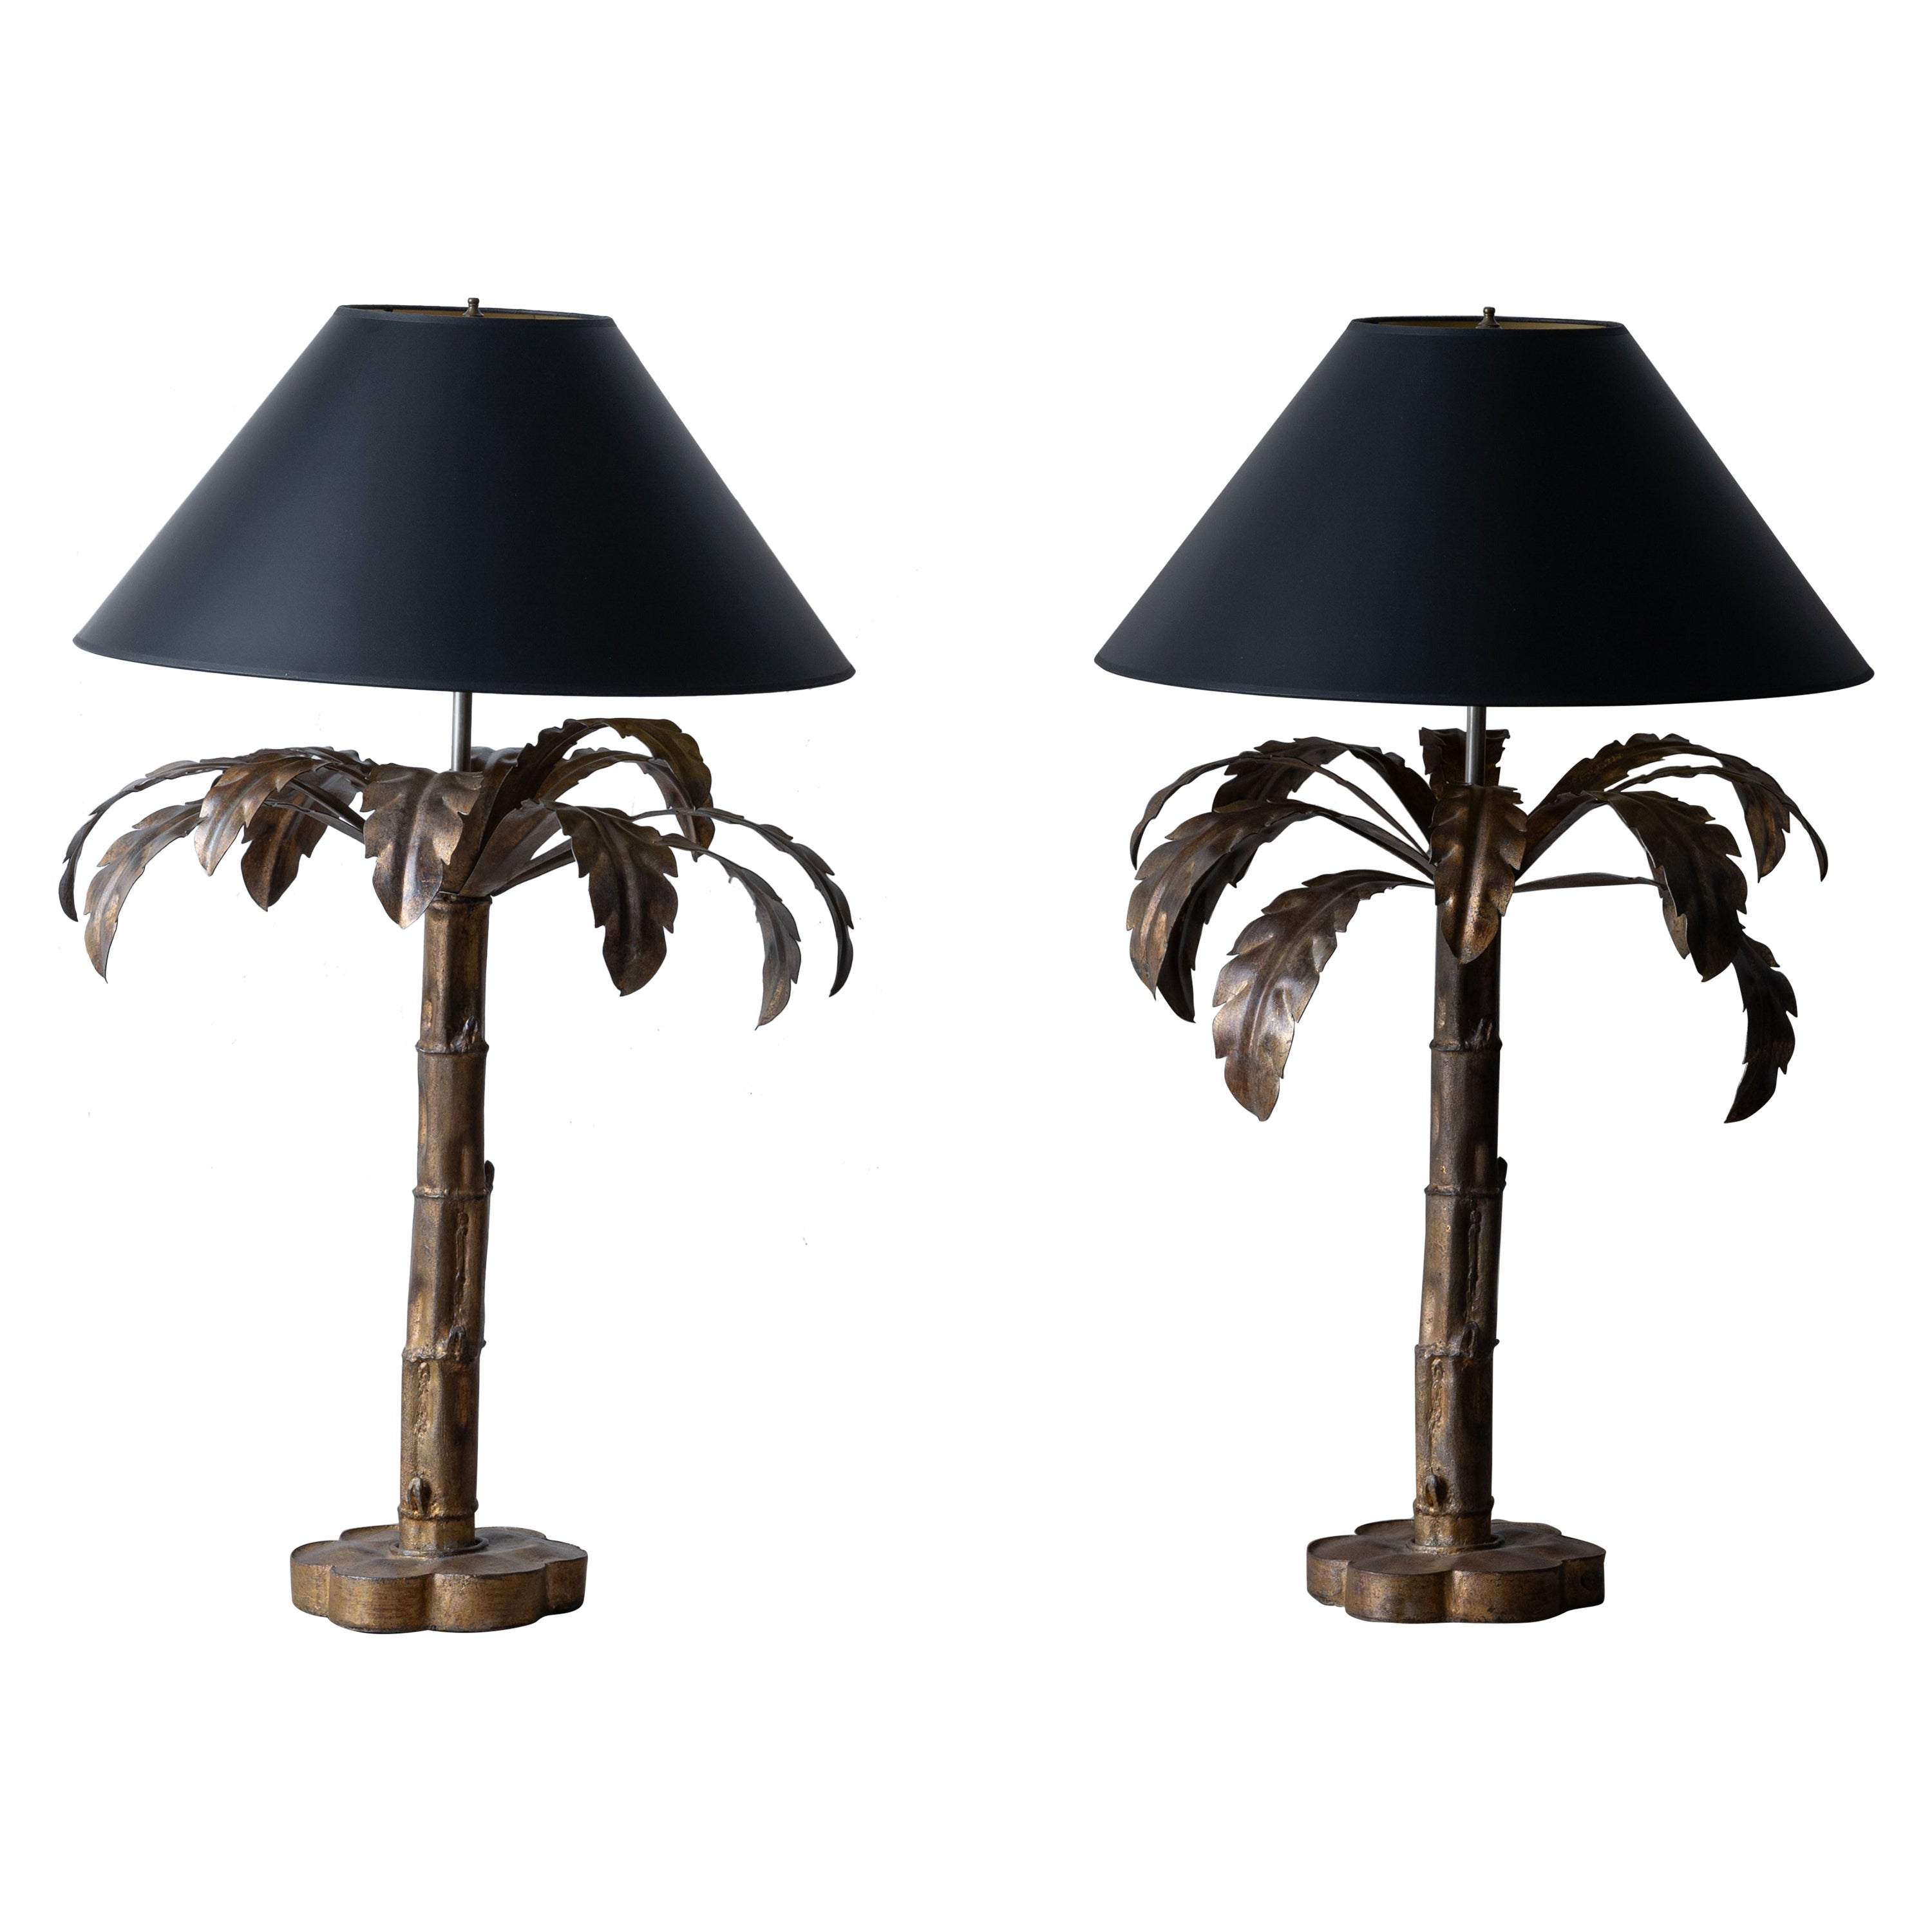 Niermann Weeks Palm Tree Table Lamps - A Pair For Sale